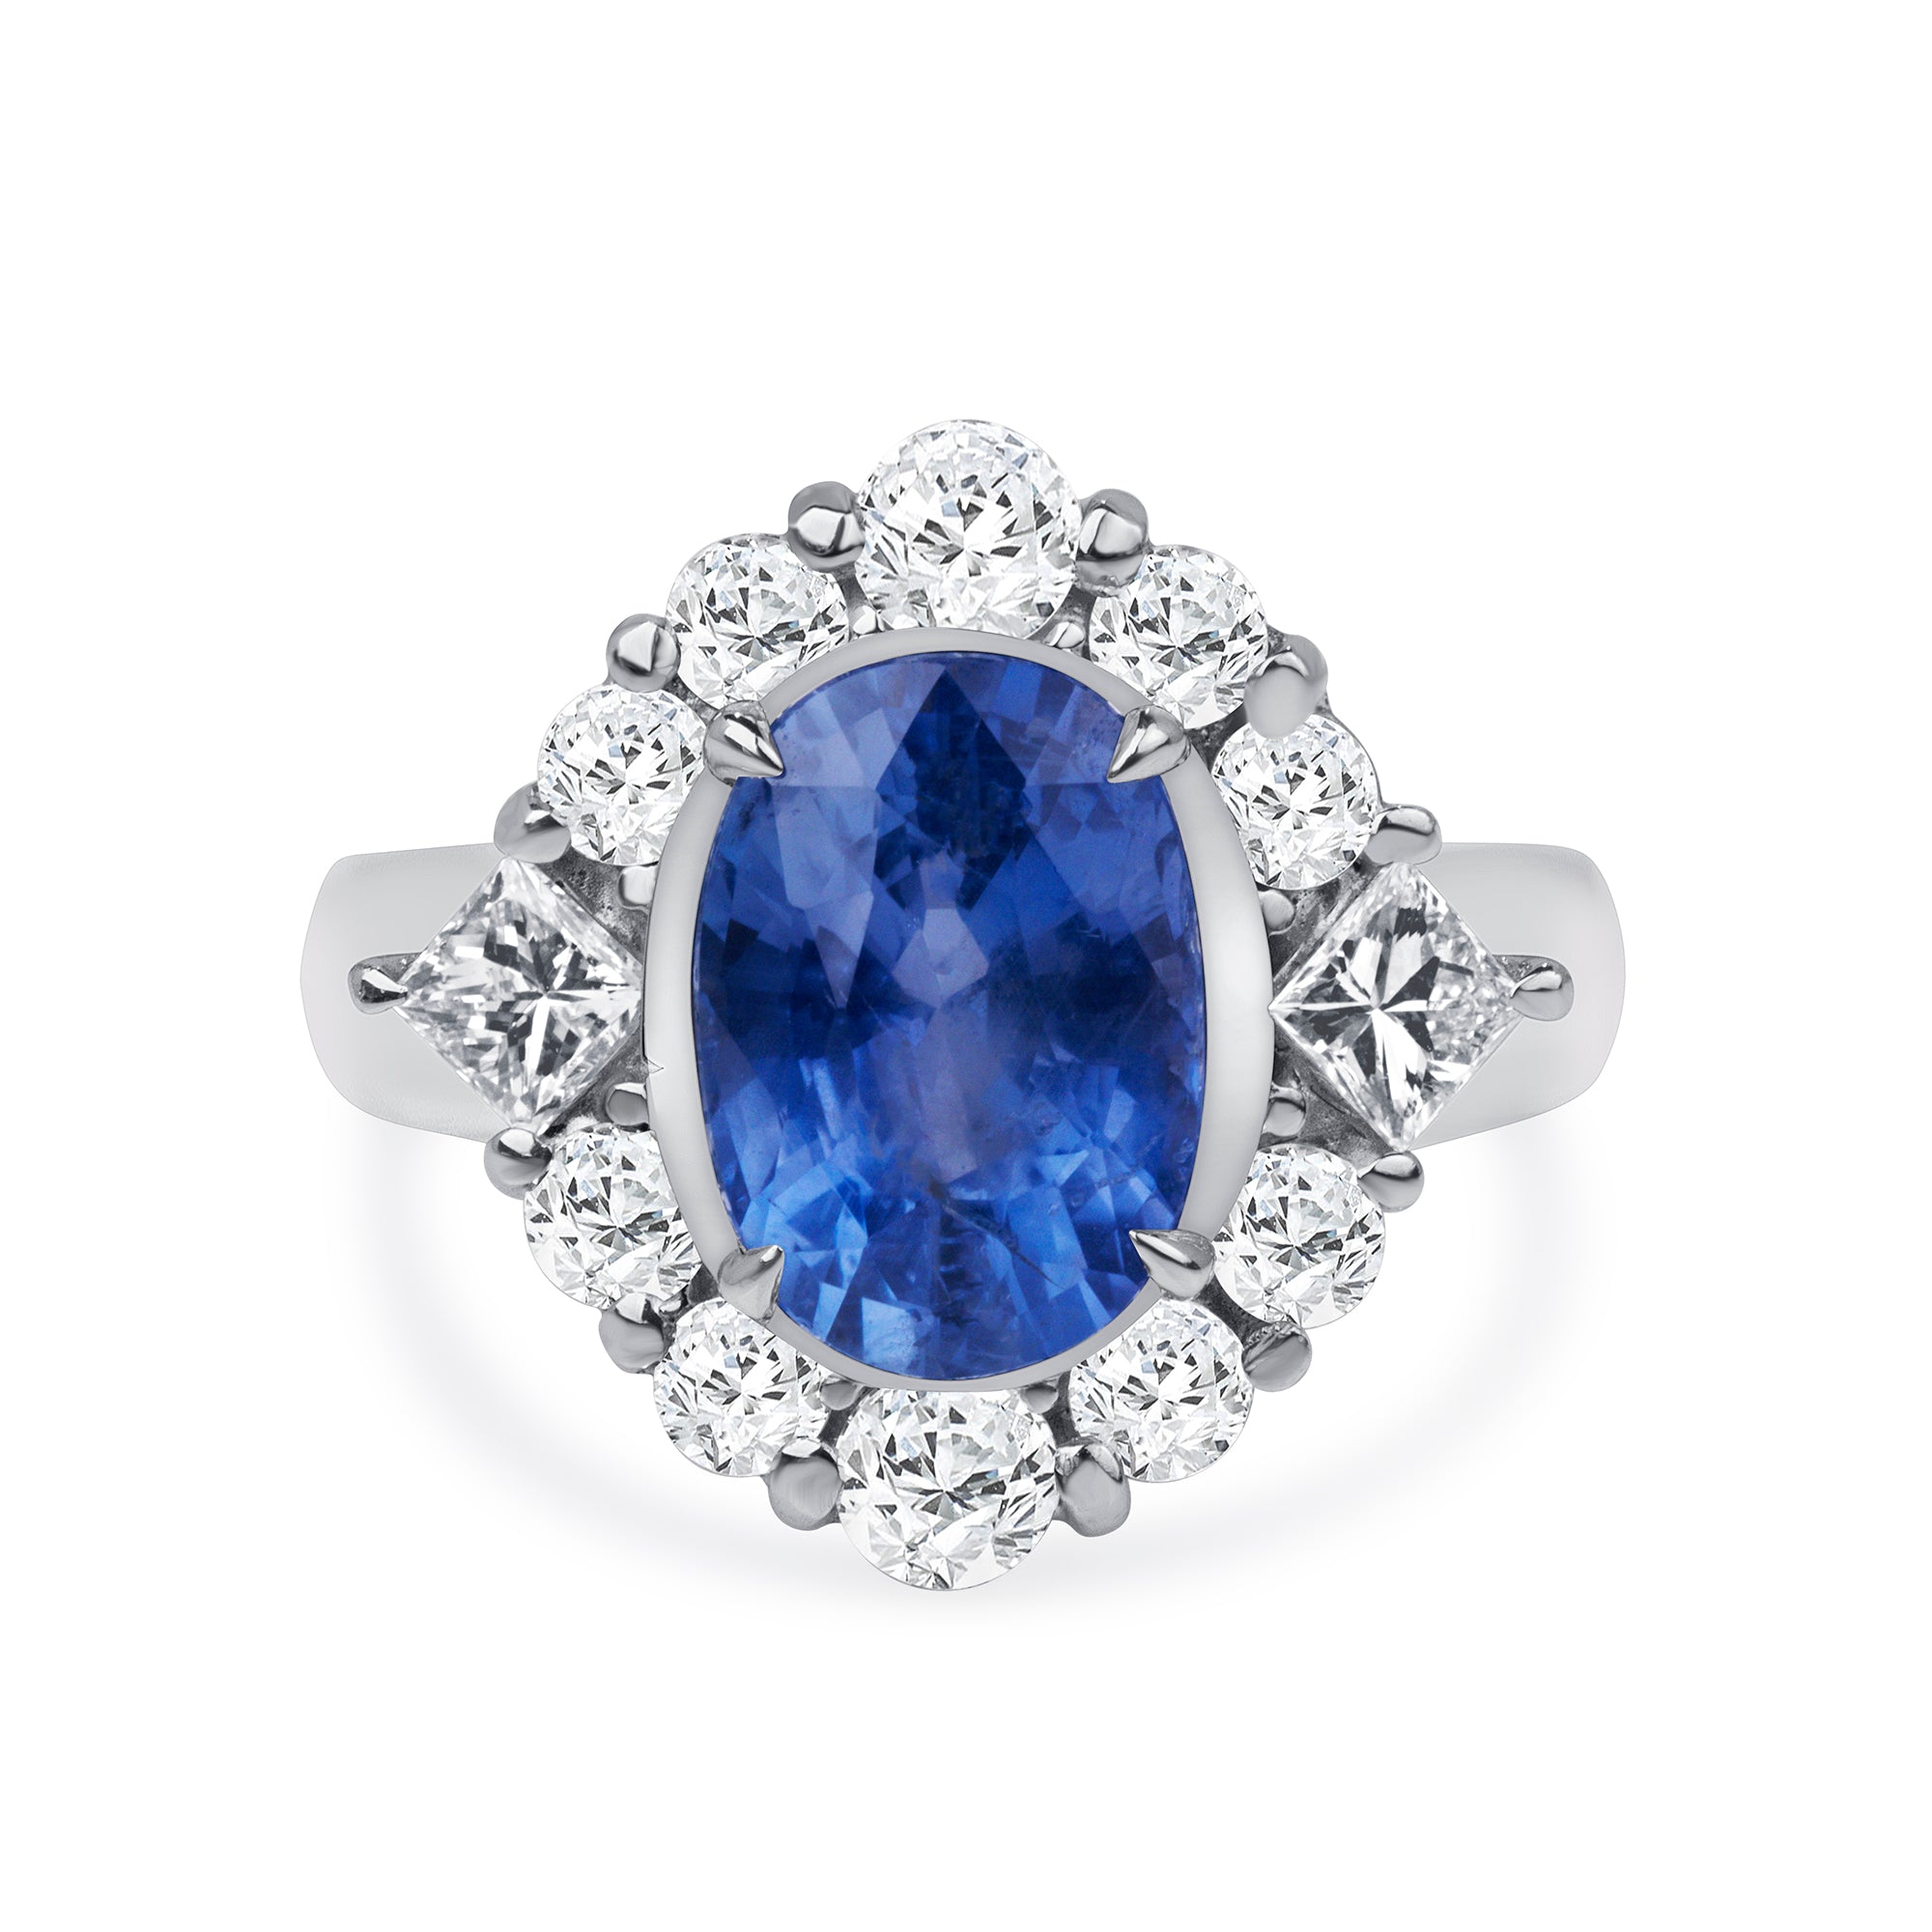 Oval Blue Sapphire and Diamond Halo Ring in Platinum